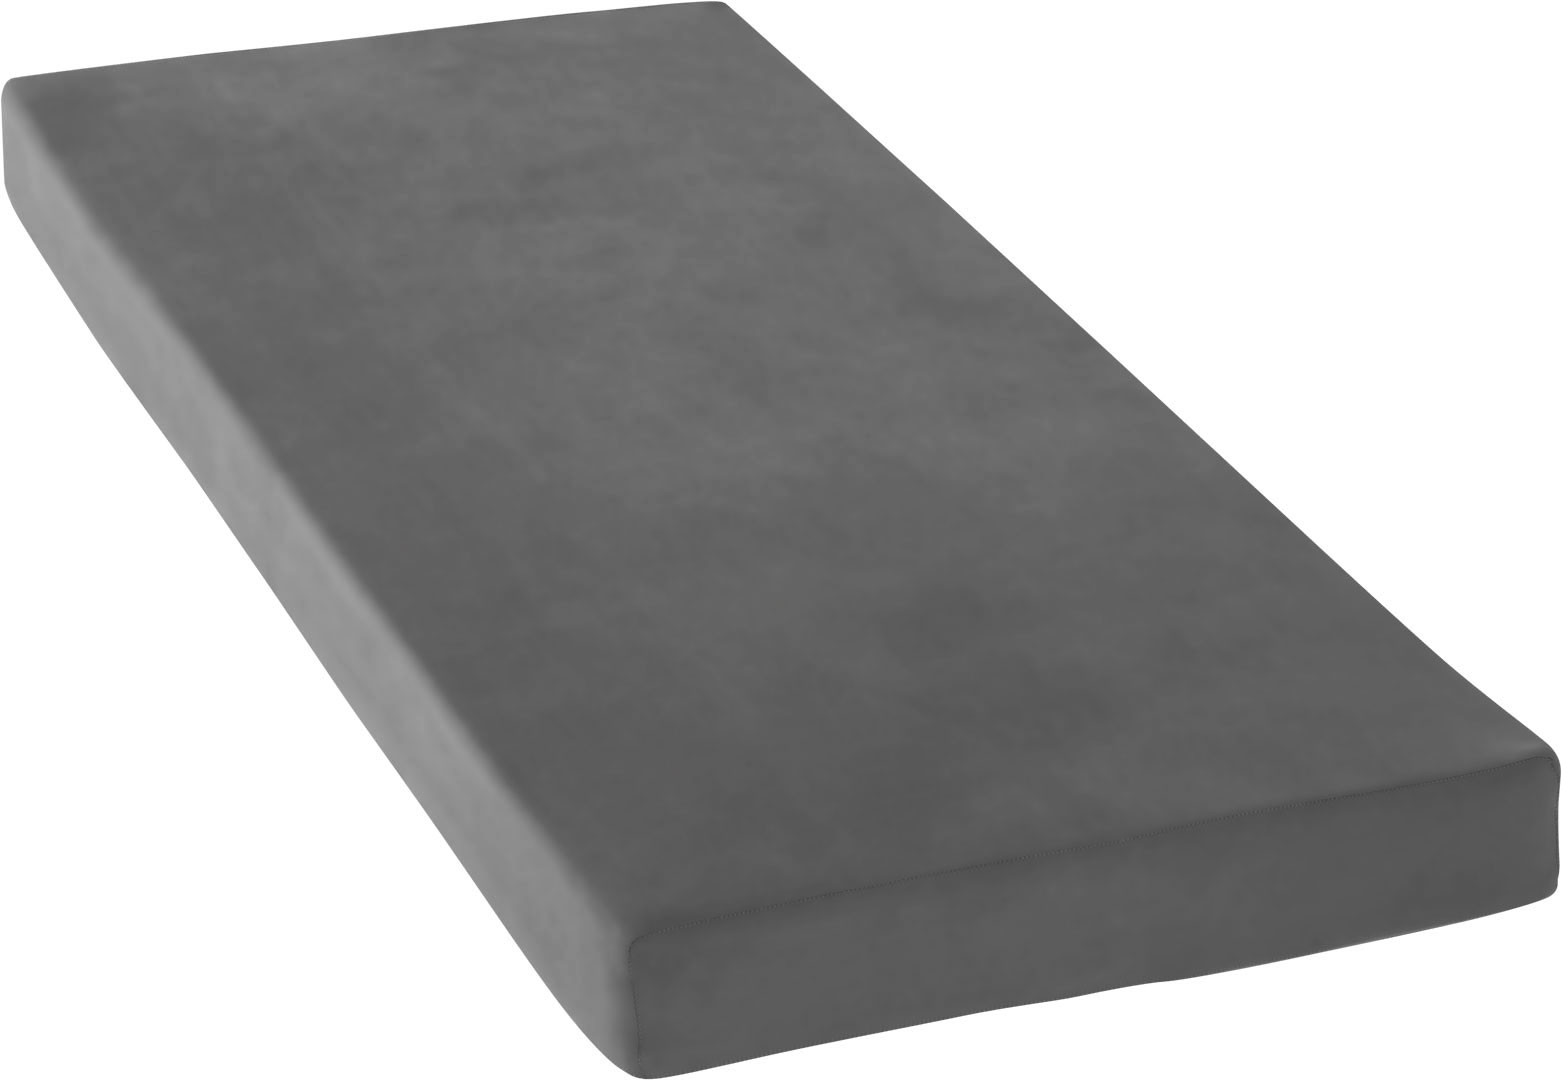 Mattress Breakdance 90x200 with Sanchi cover